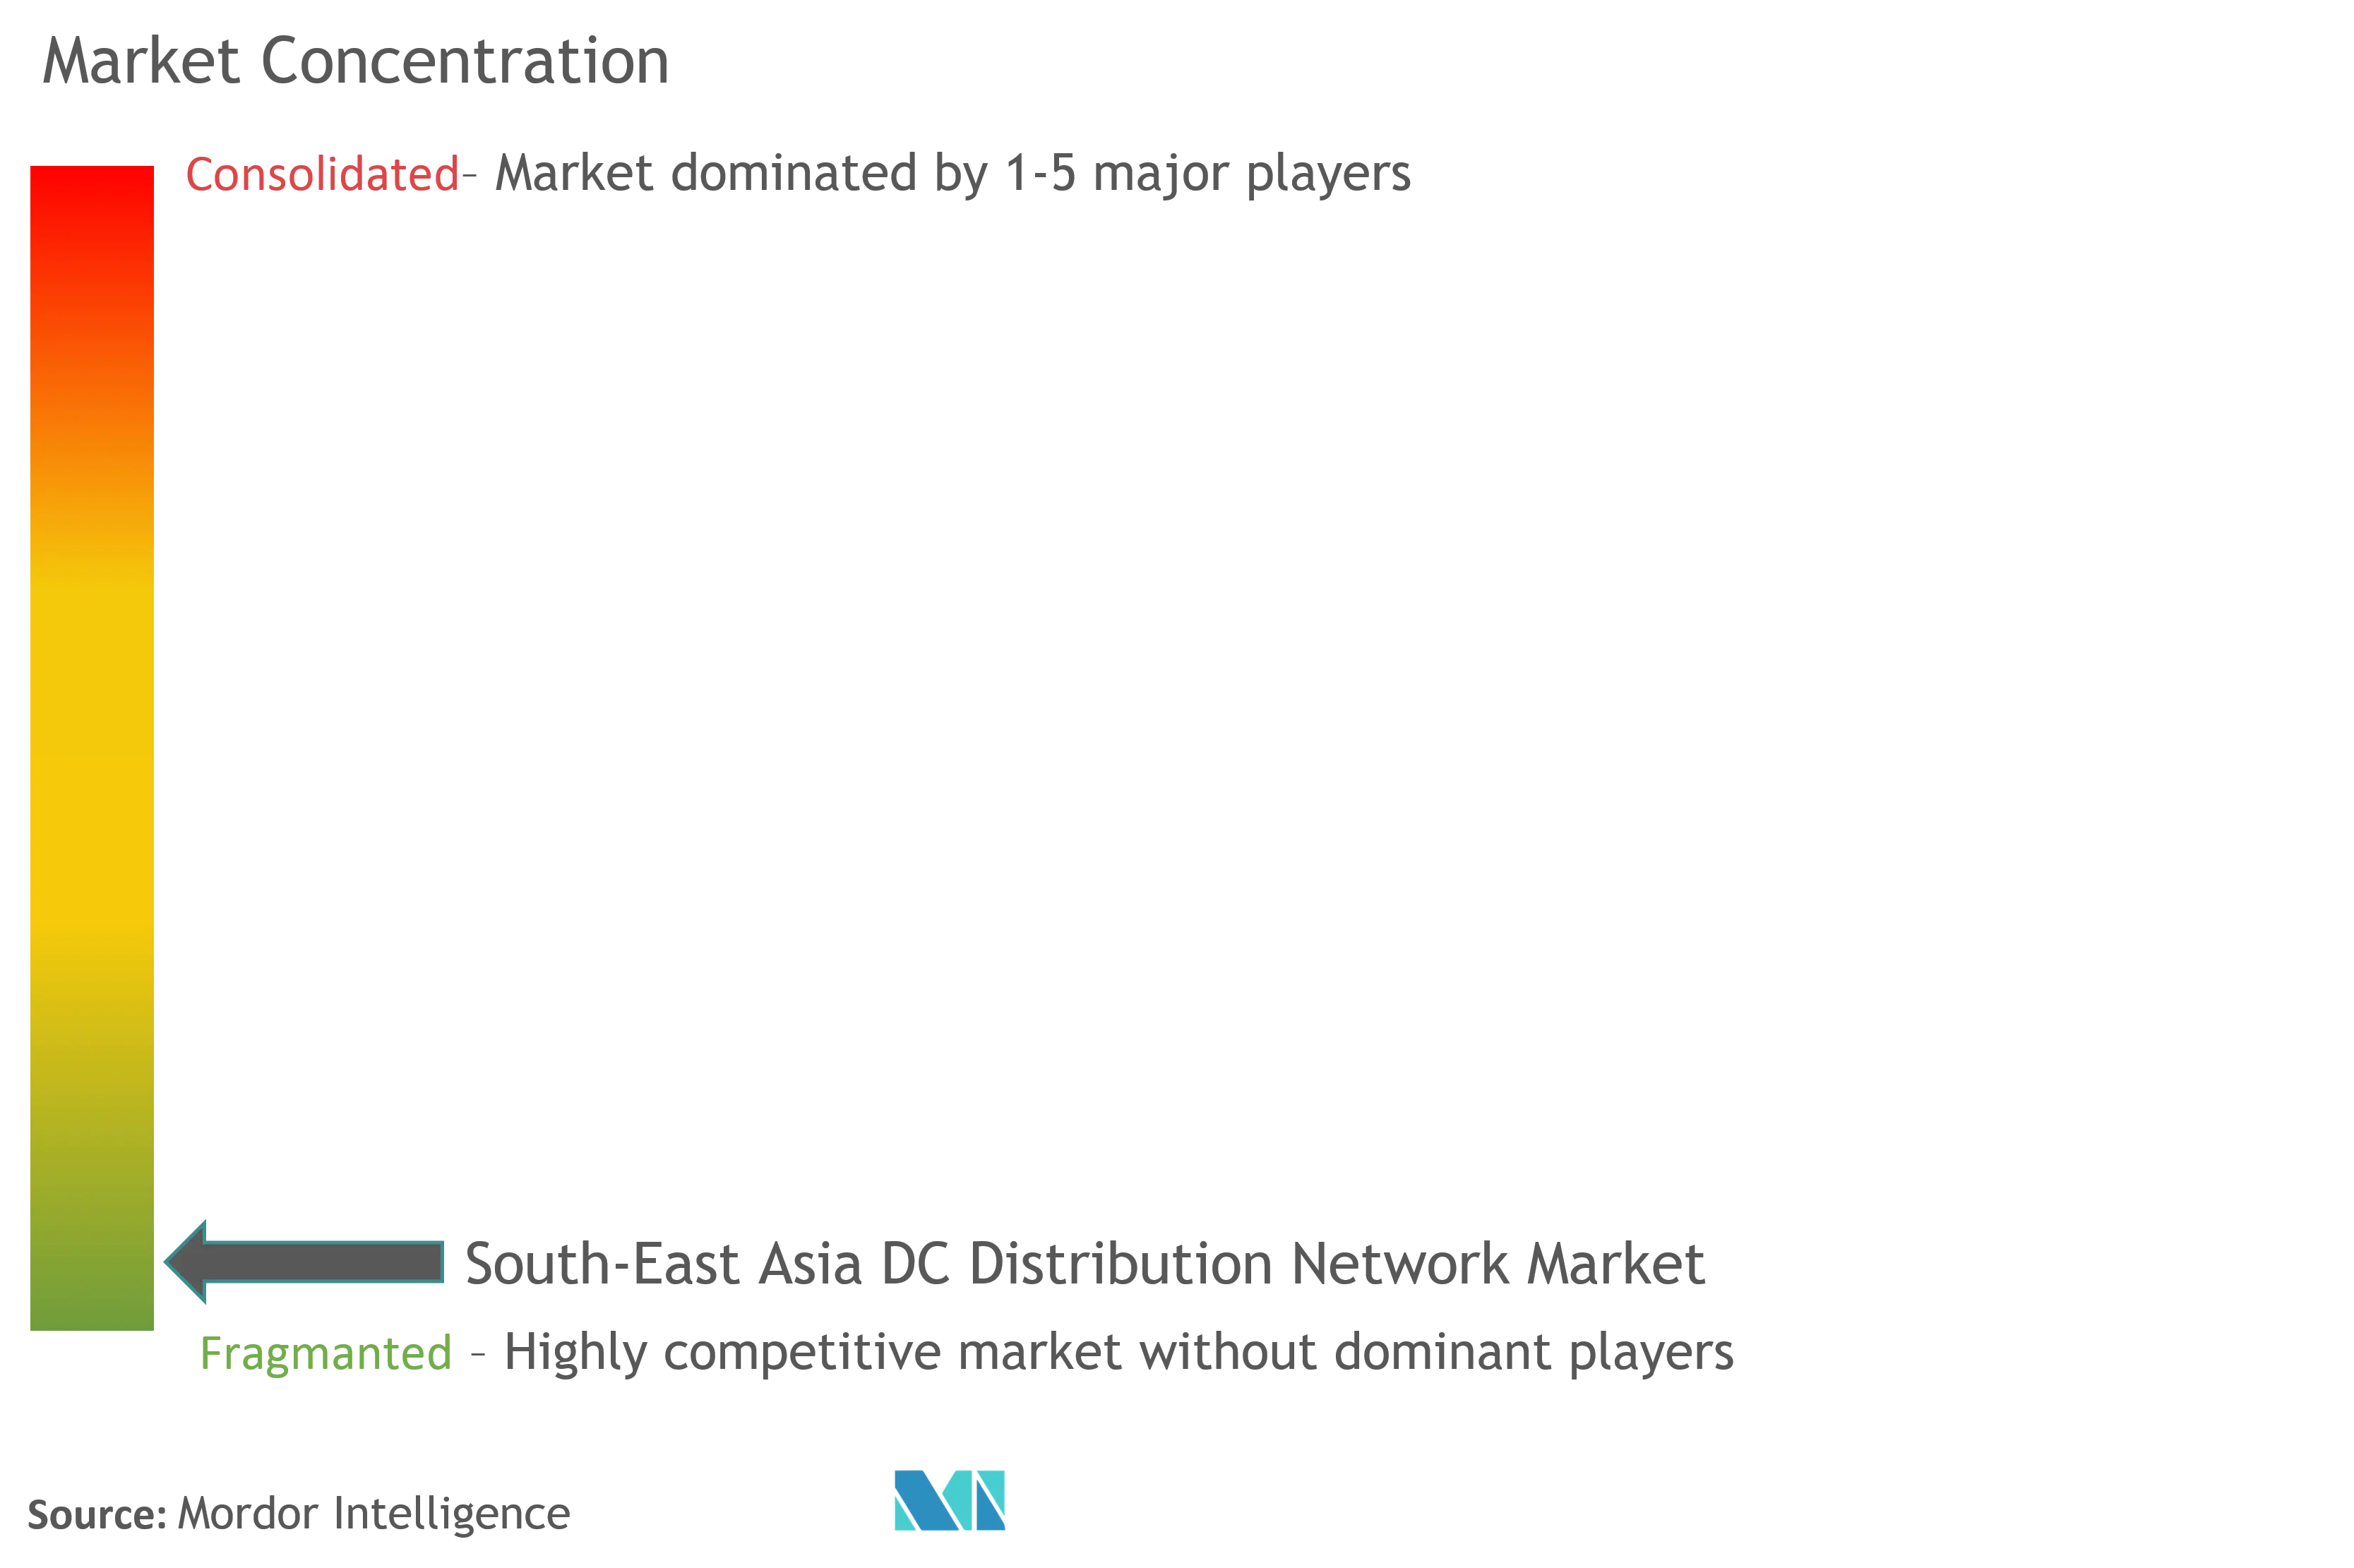 South-East Asia DC Distribution Network Market Concentration